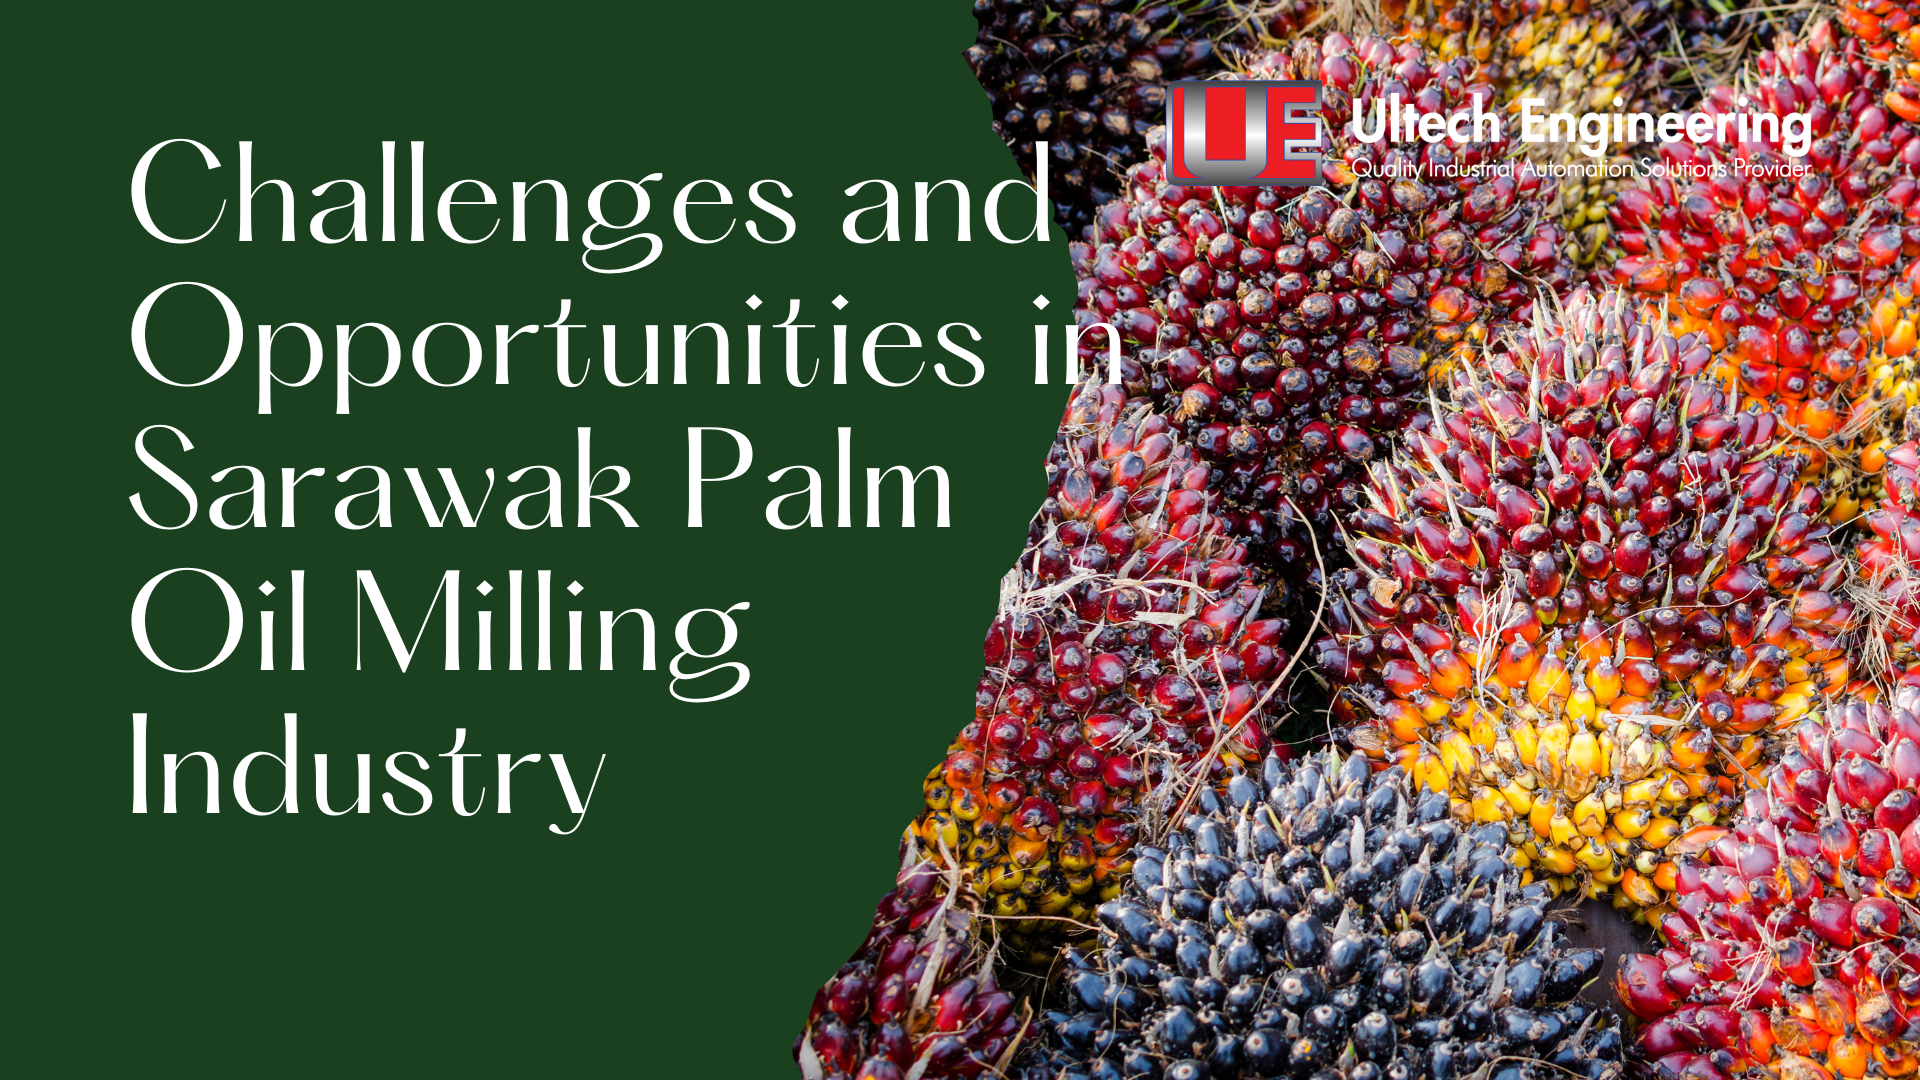 Ultech Engineering Taps into Challenges and Opportunities in Sarawak Palm Oil Milling Industry